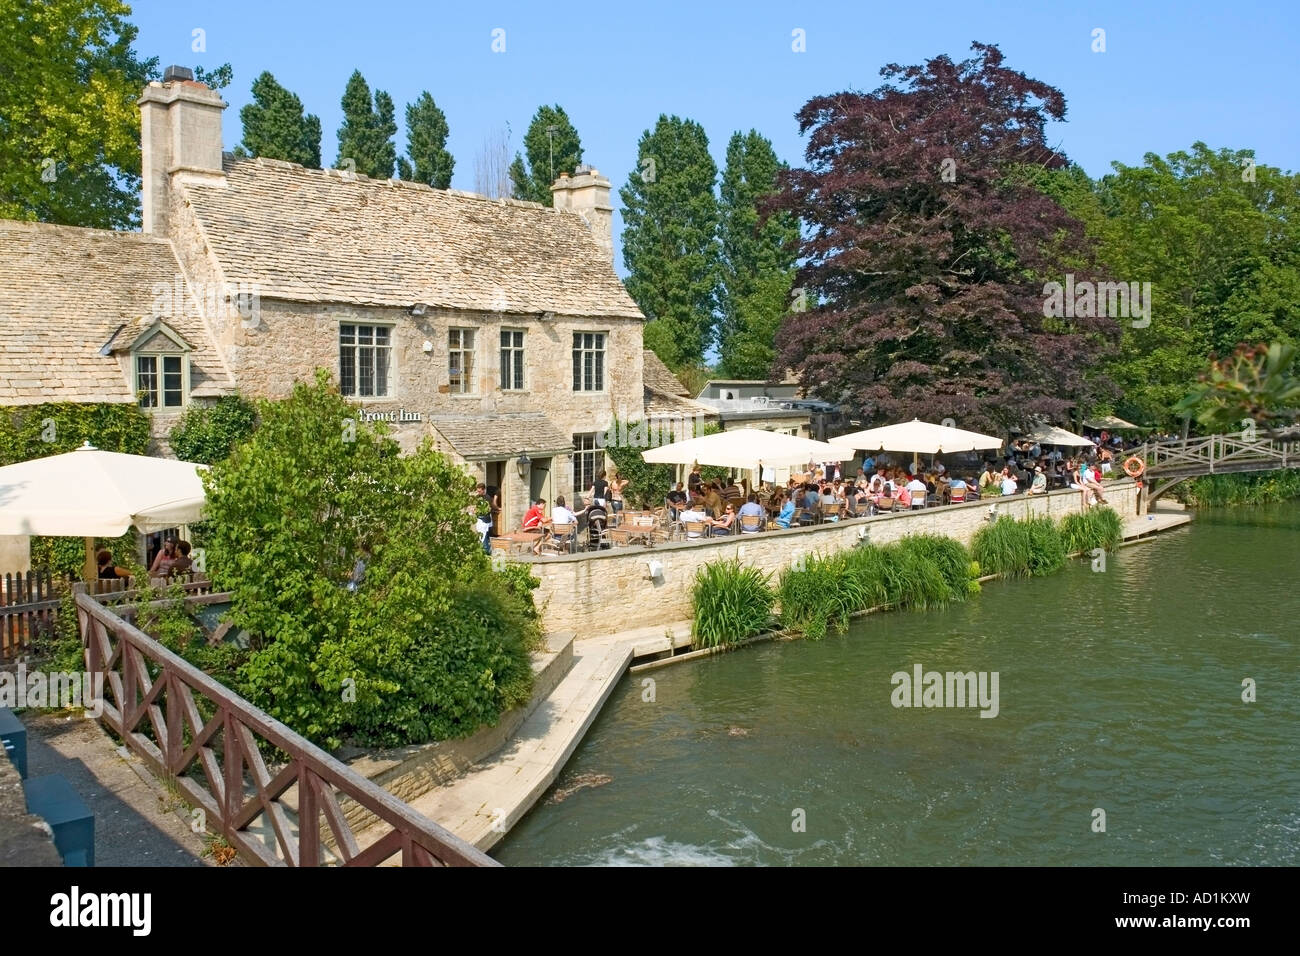 The Trout Inn, on the Thames at Wolvercote, near Oxford, Oxfordshire Stock Photo